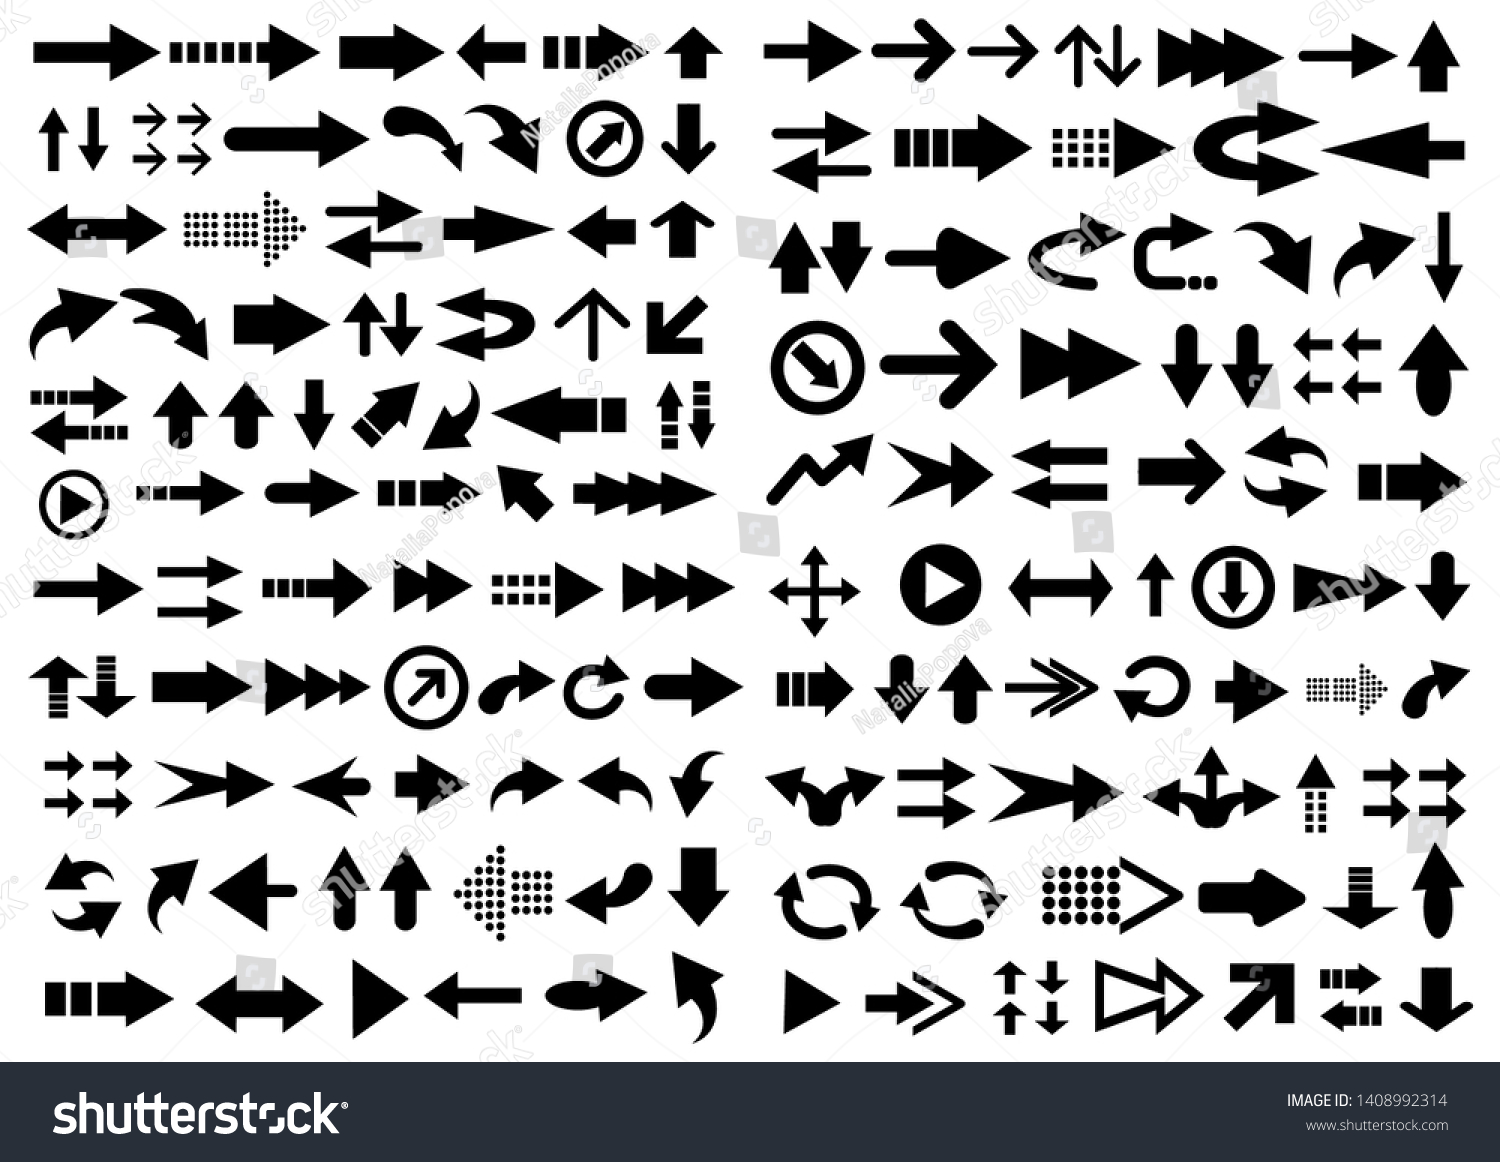 Big vector set of arrow shapes isolated on white. #1408992314